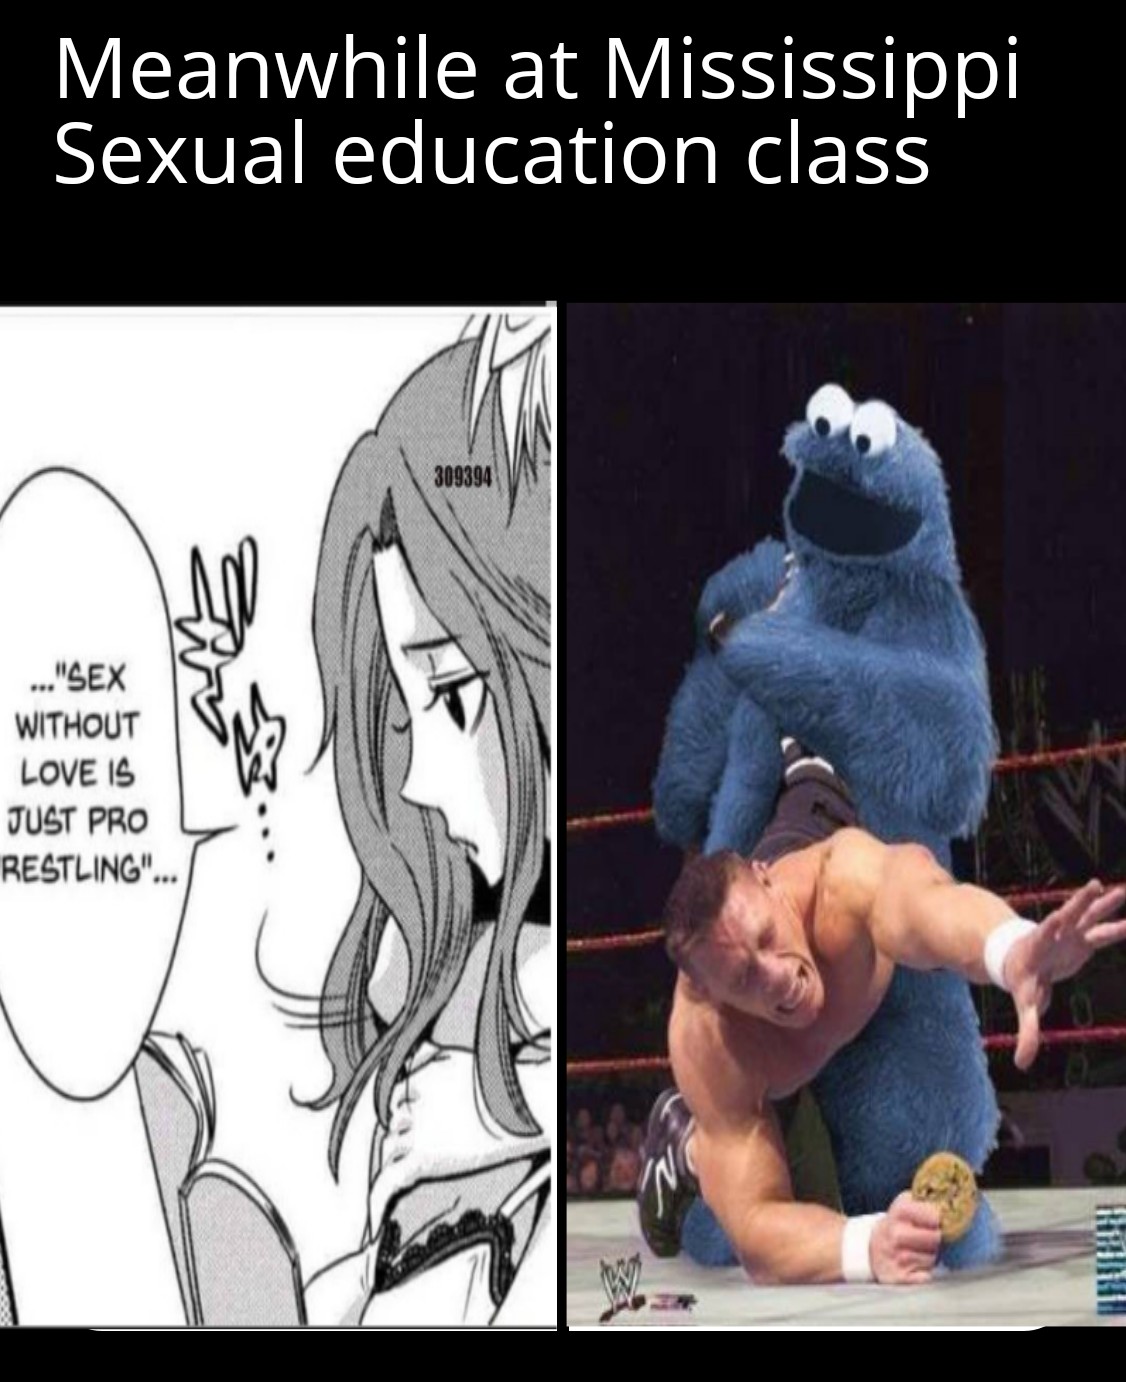 funny memes - dank memes - cartoon - Meanwhile at Mississippi Sexual education class 309394 ...